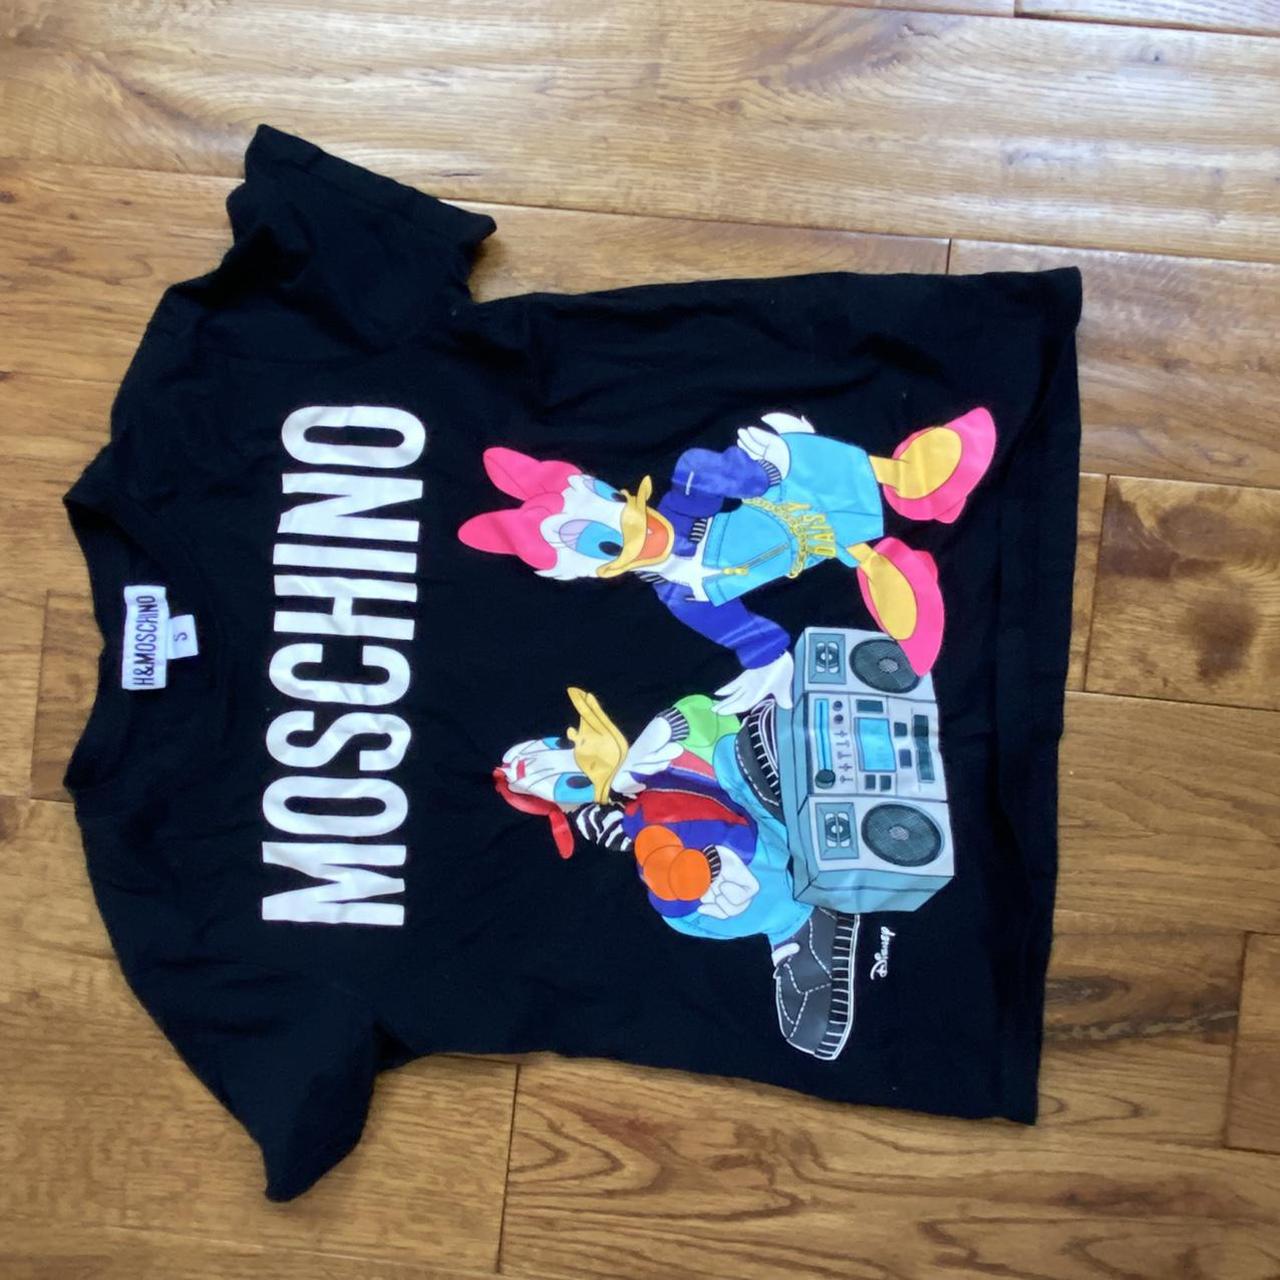 Product Image 1 - Moschino for H&M Disney top

Next